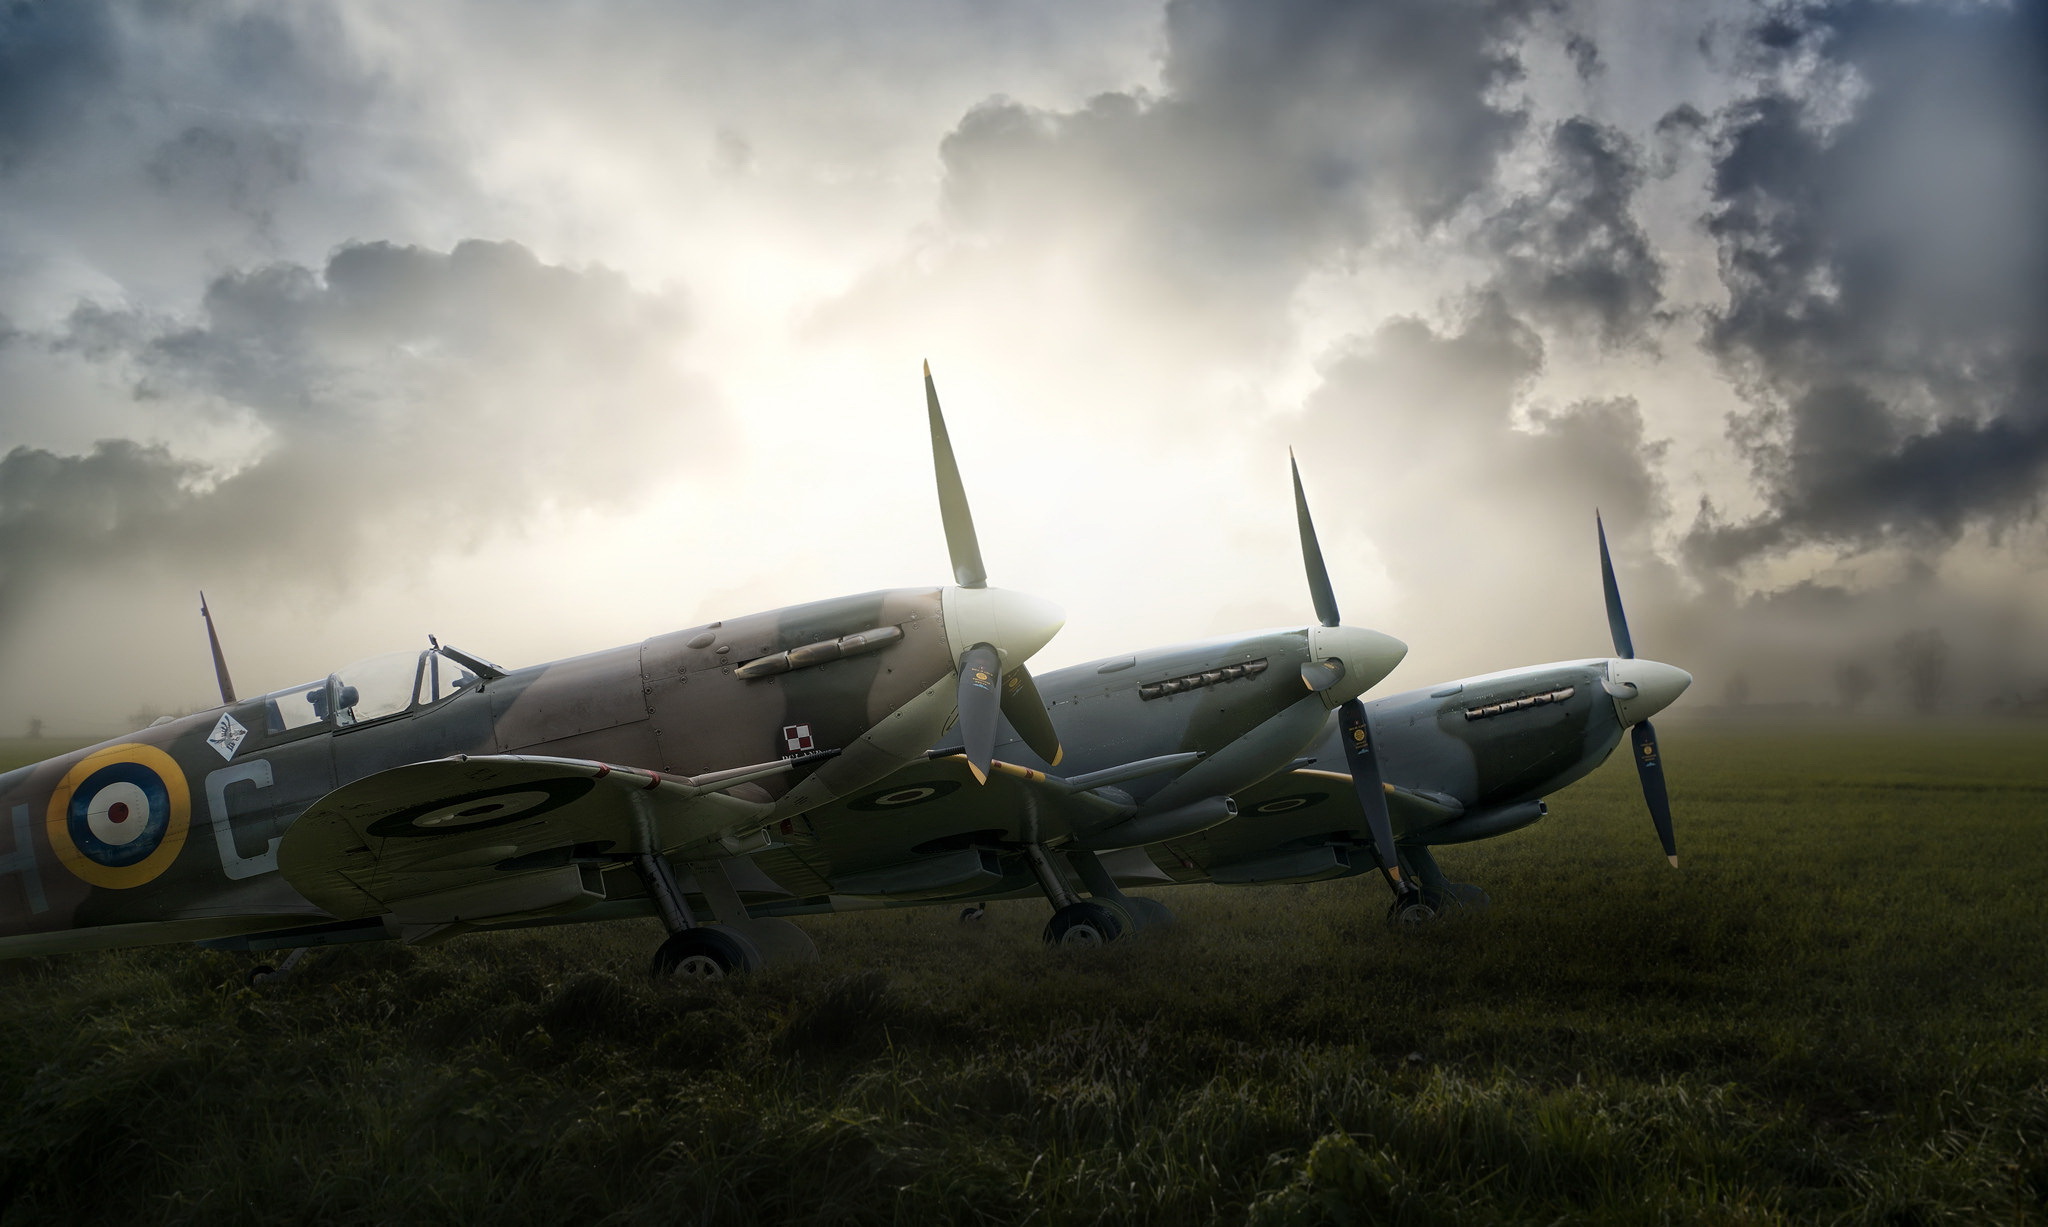 Wallpaper Airplane Soldiers Supermarine Spitfire Painting Art